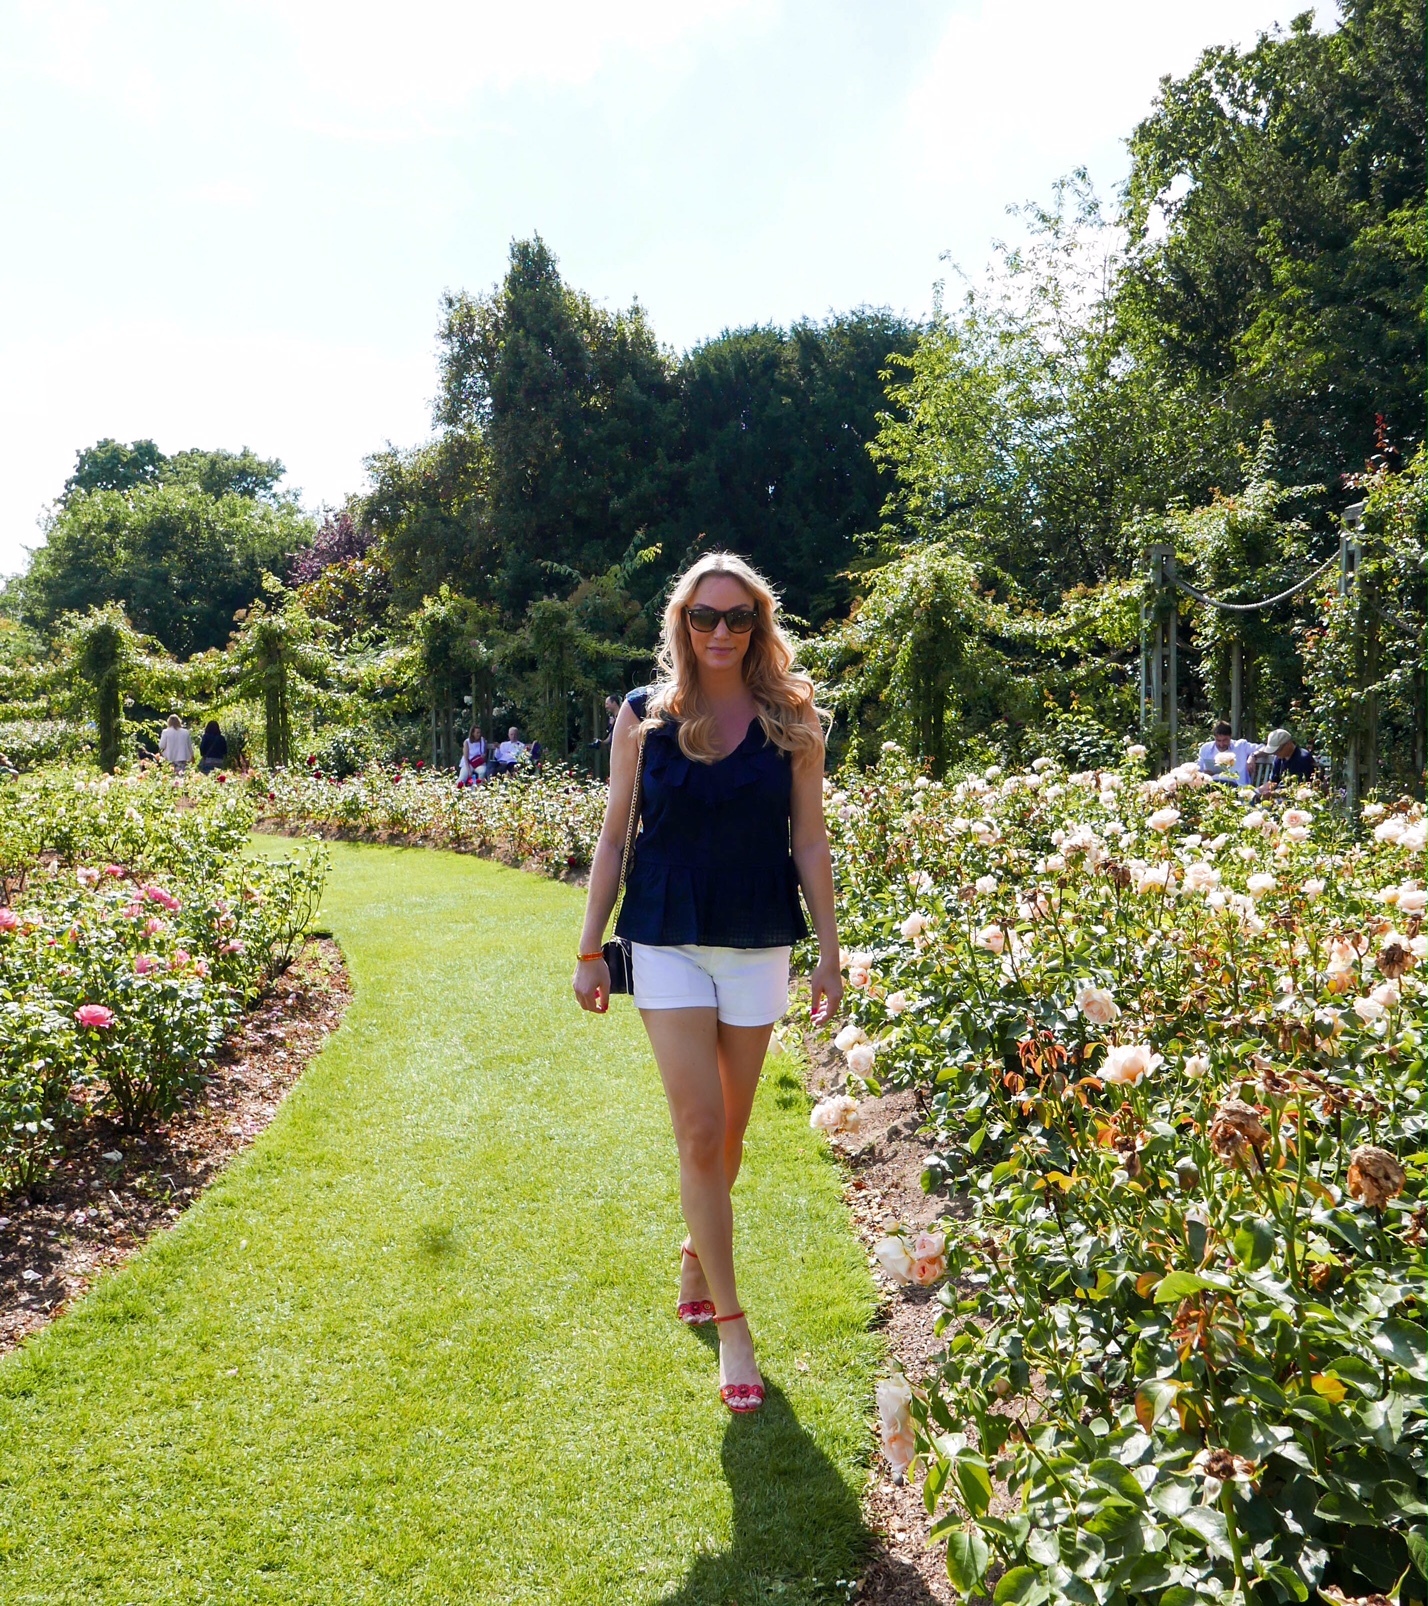 Take a break and smell the roses! A sunny Sunday in The Regent’s Park